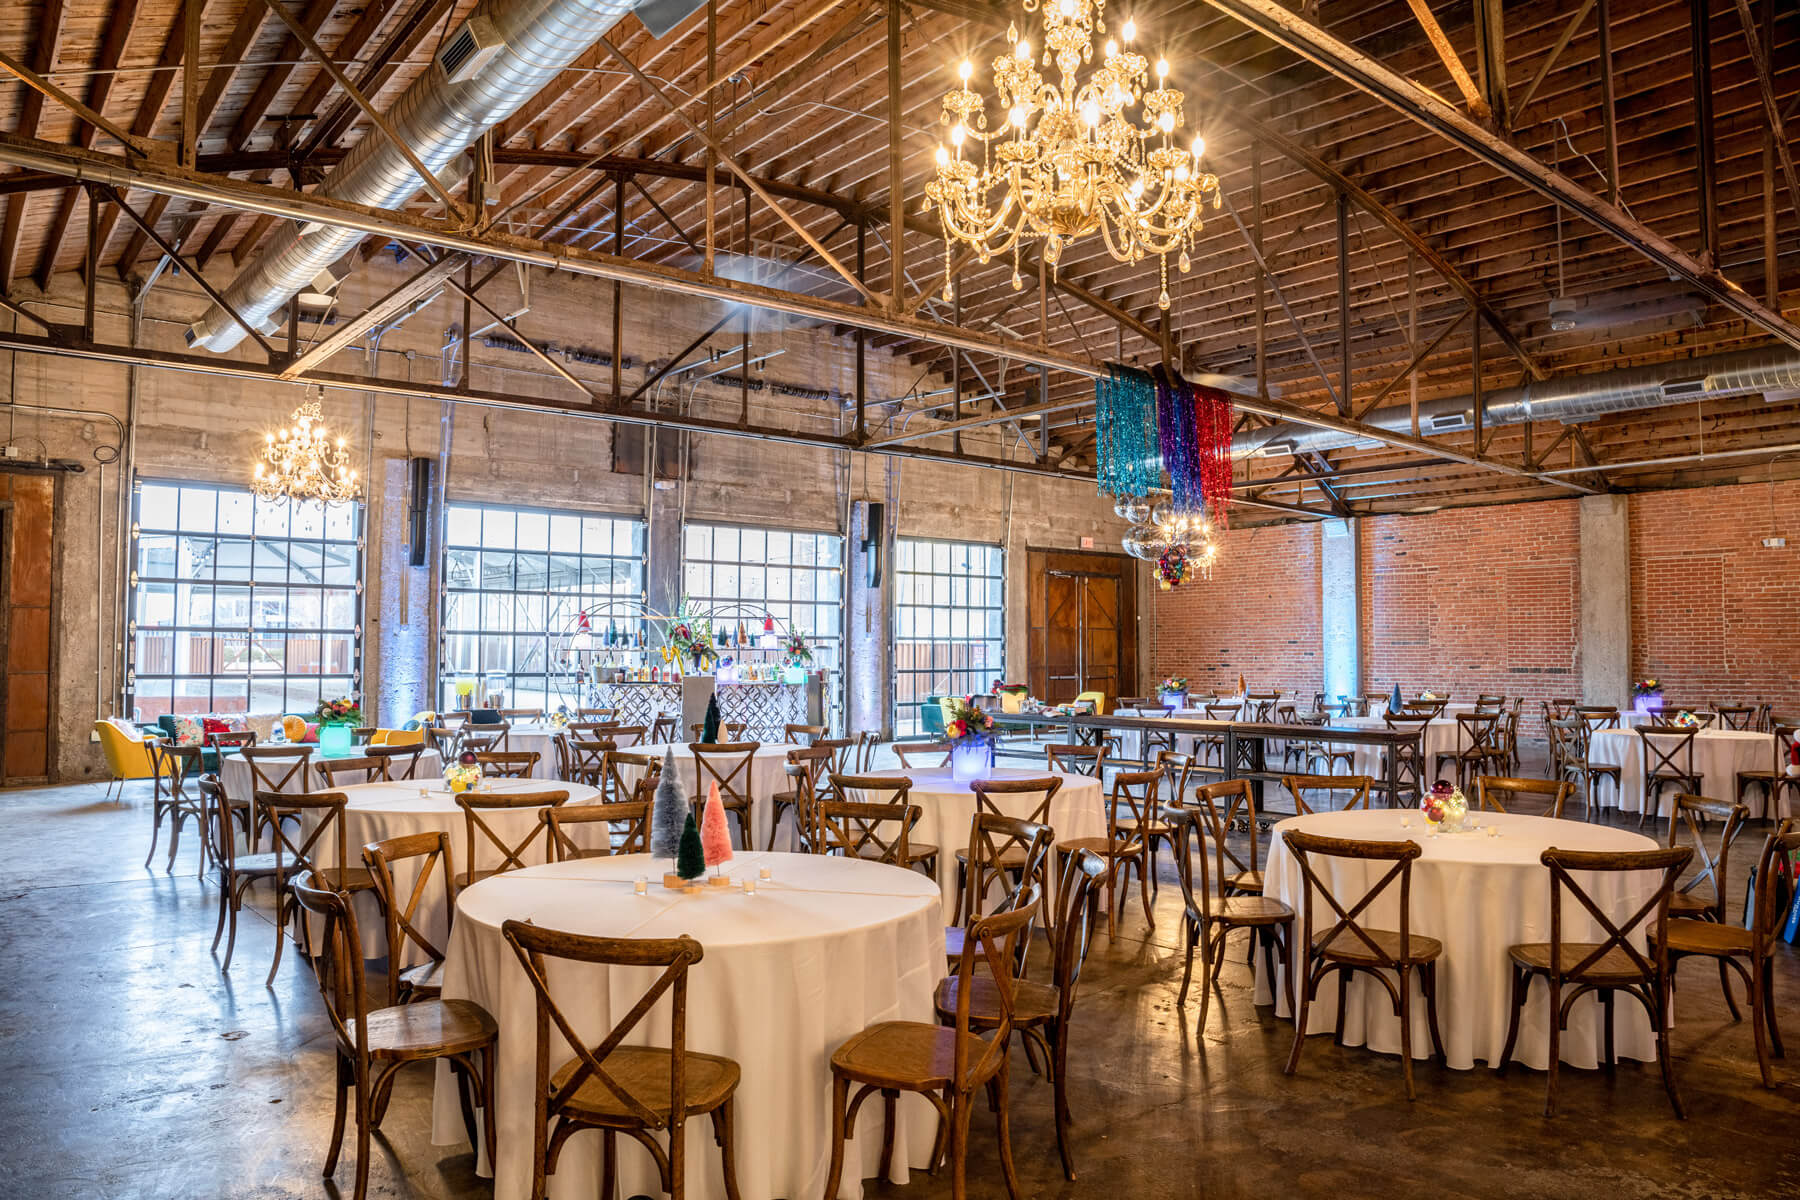 Interior of the venue featuring brick walls, chandelier, and round tables setup for an event.